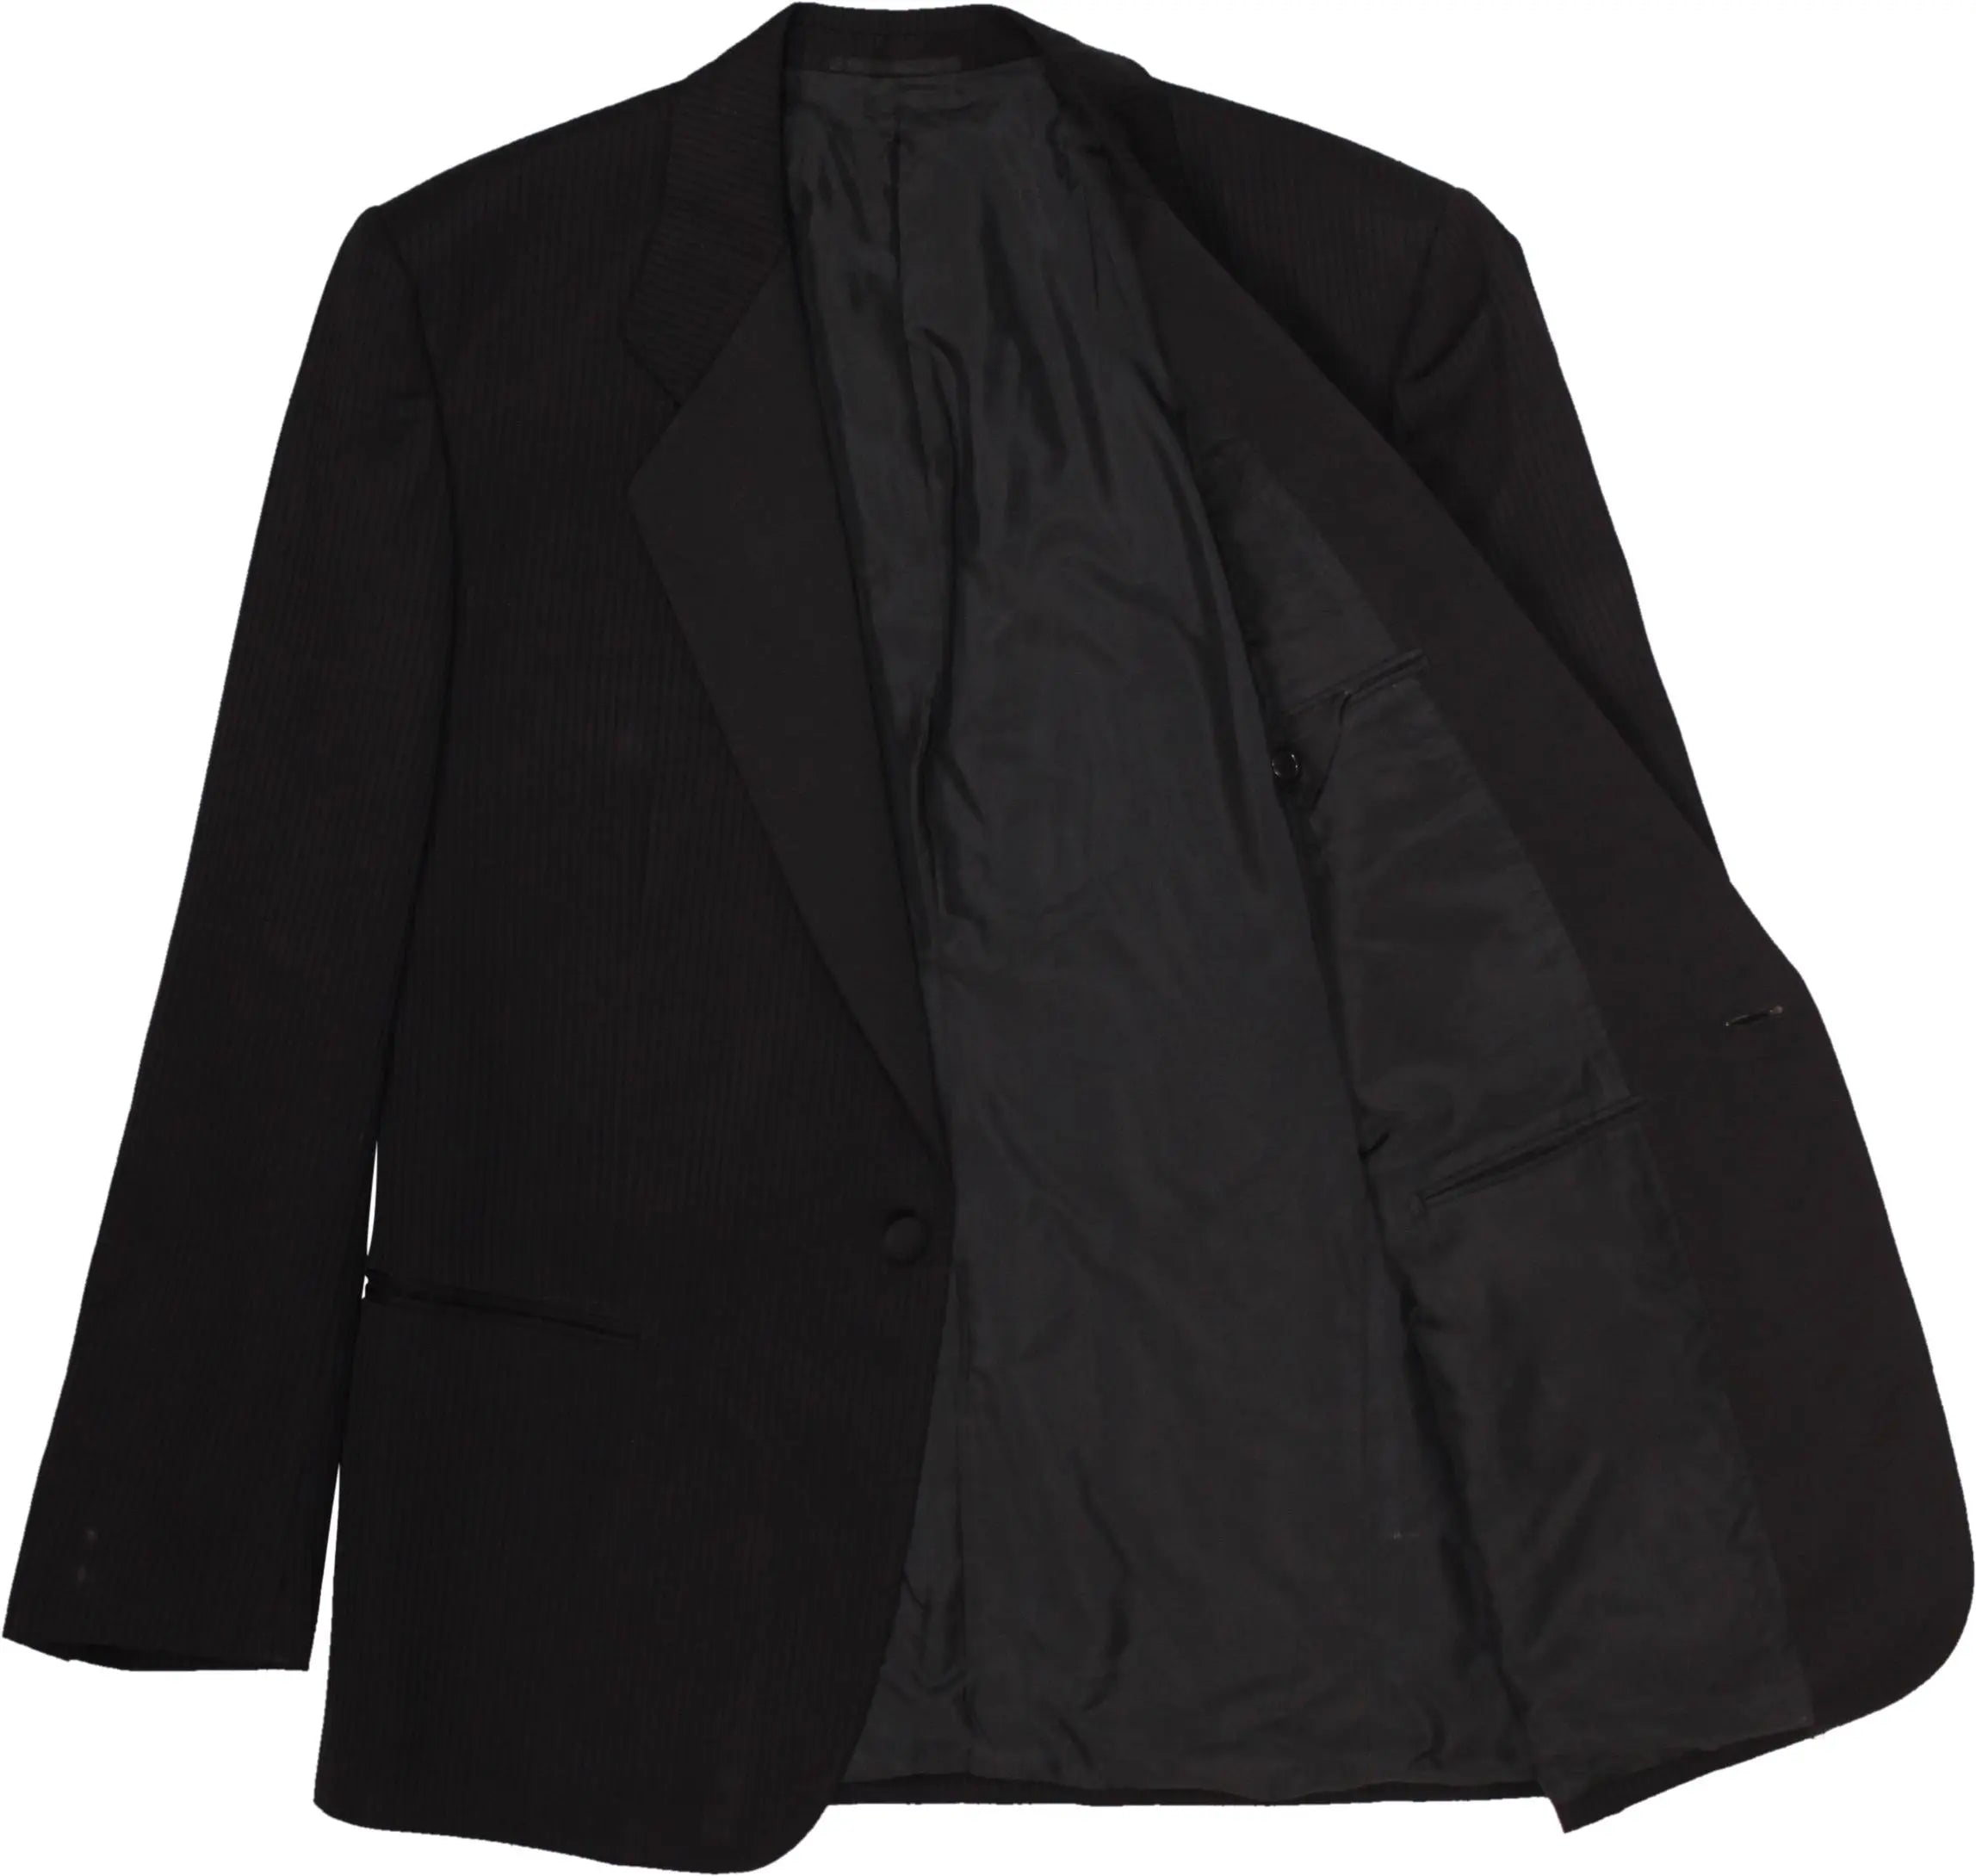 Gianfranco Ferre - Black Blazer by Gianfranco Ferre- ThriftTale.com - Vintage and second handclothing